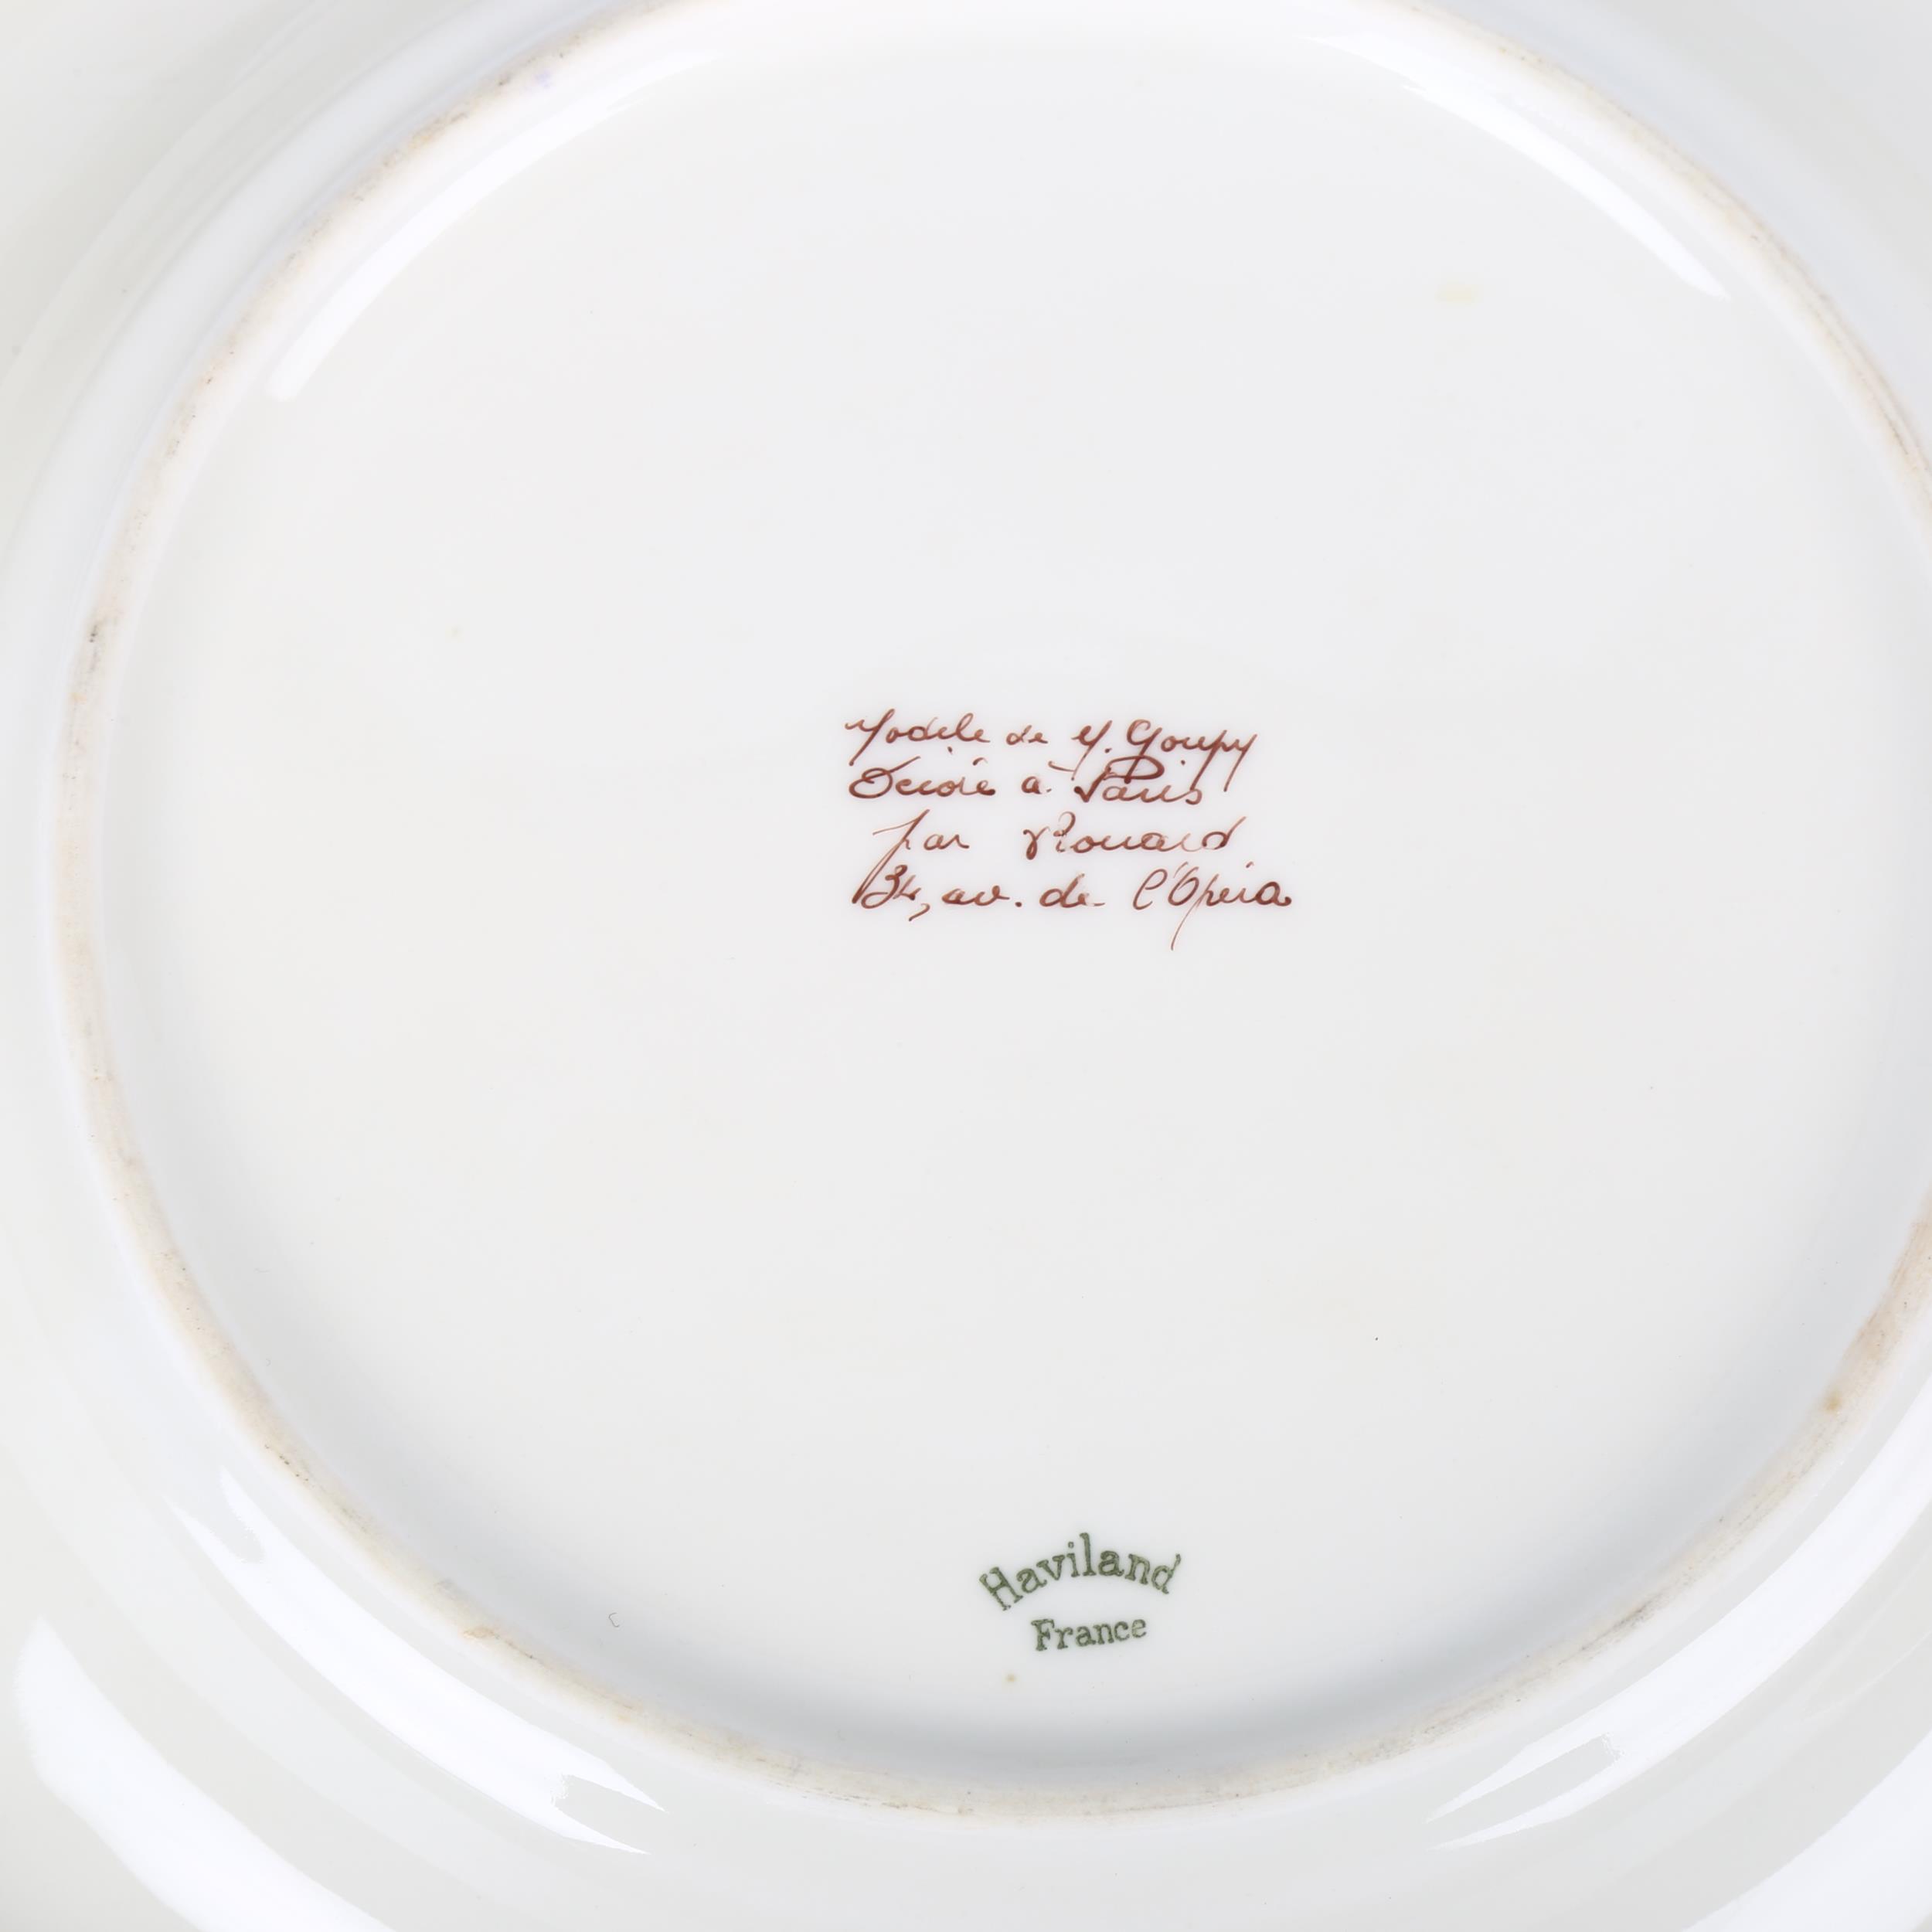 MARCEL GOUPY for ROUARD, Paris,1930s, a pair of dinner plates with gilt rim and sponged floral - Image 3 of 3